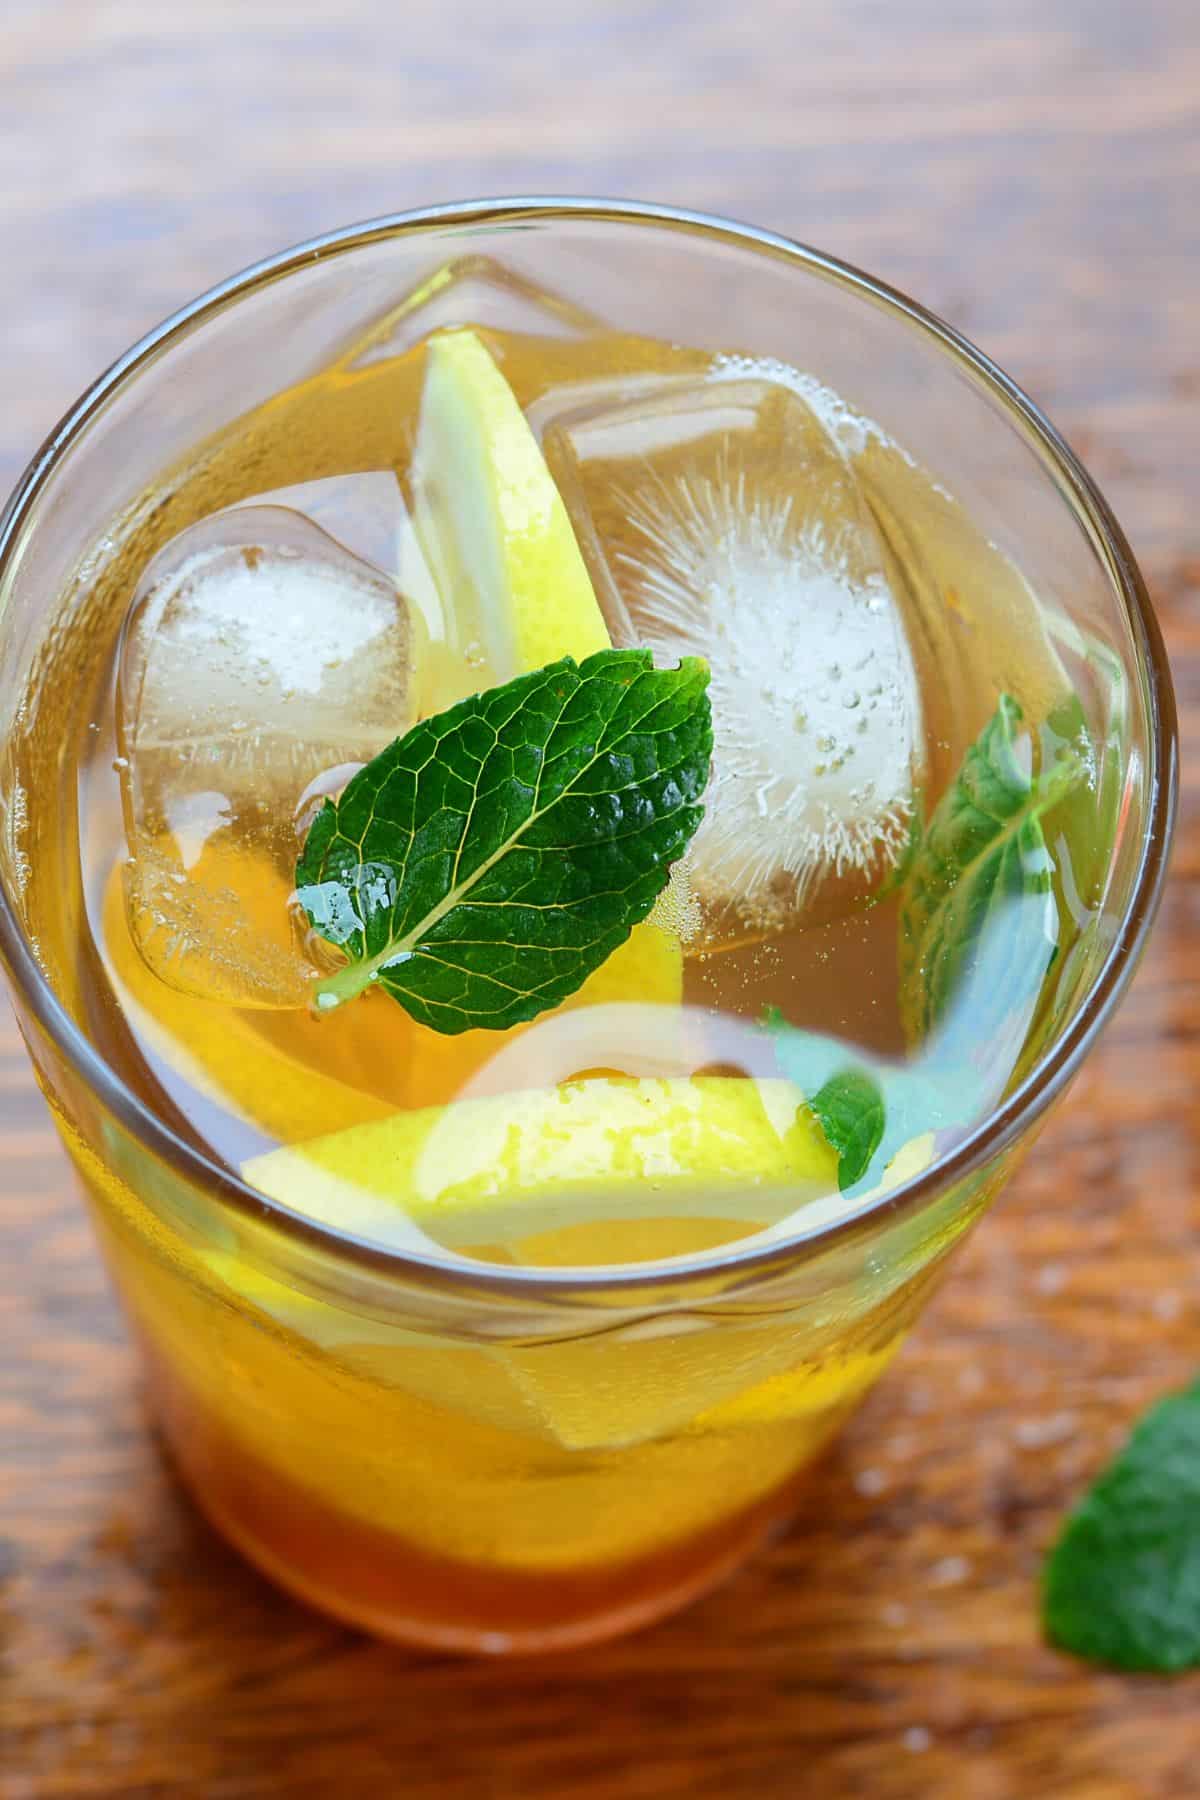 Glass filled with tea, ice, lemon and mint.